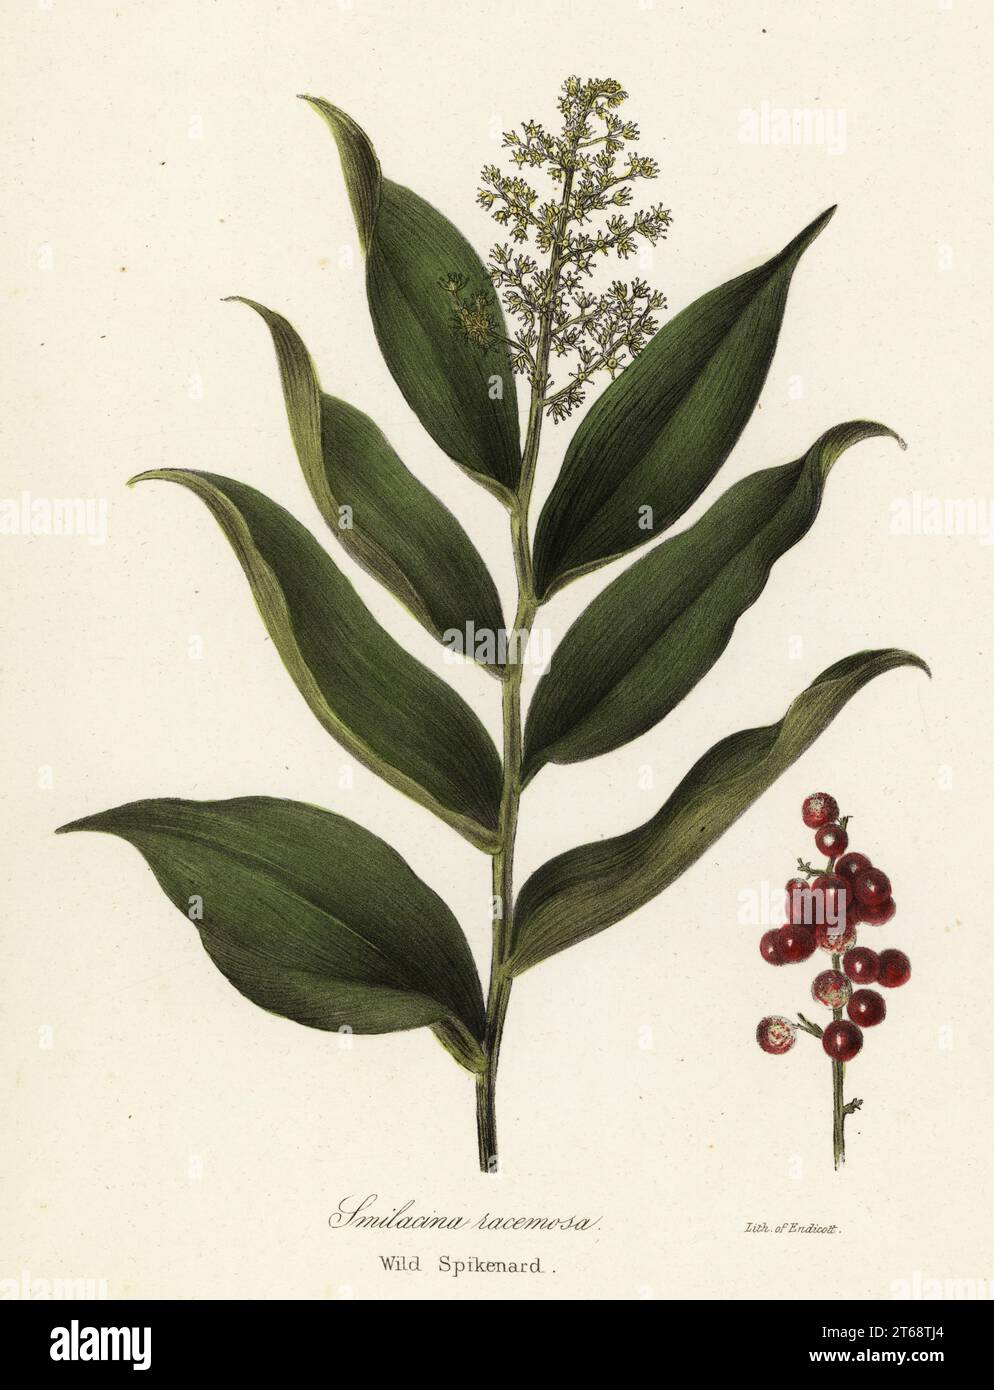 Treacleberry, Maianthemum racemosum (Wild spikenard, Smilacina racemosa). Handcoloured lithograph by Endicott after a botanical illustration from John Torreys A Flora of the State of New York, Carroll and Cook, Albany, 1843. The plates drawn by John Torrey, Agnes Mitchell, Elizabeth Paoley and Swinton. John Torrey was an American botanist, chemist and physician 1796-1873. Stock Photo